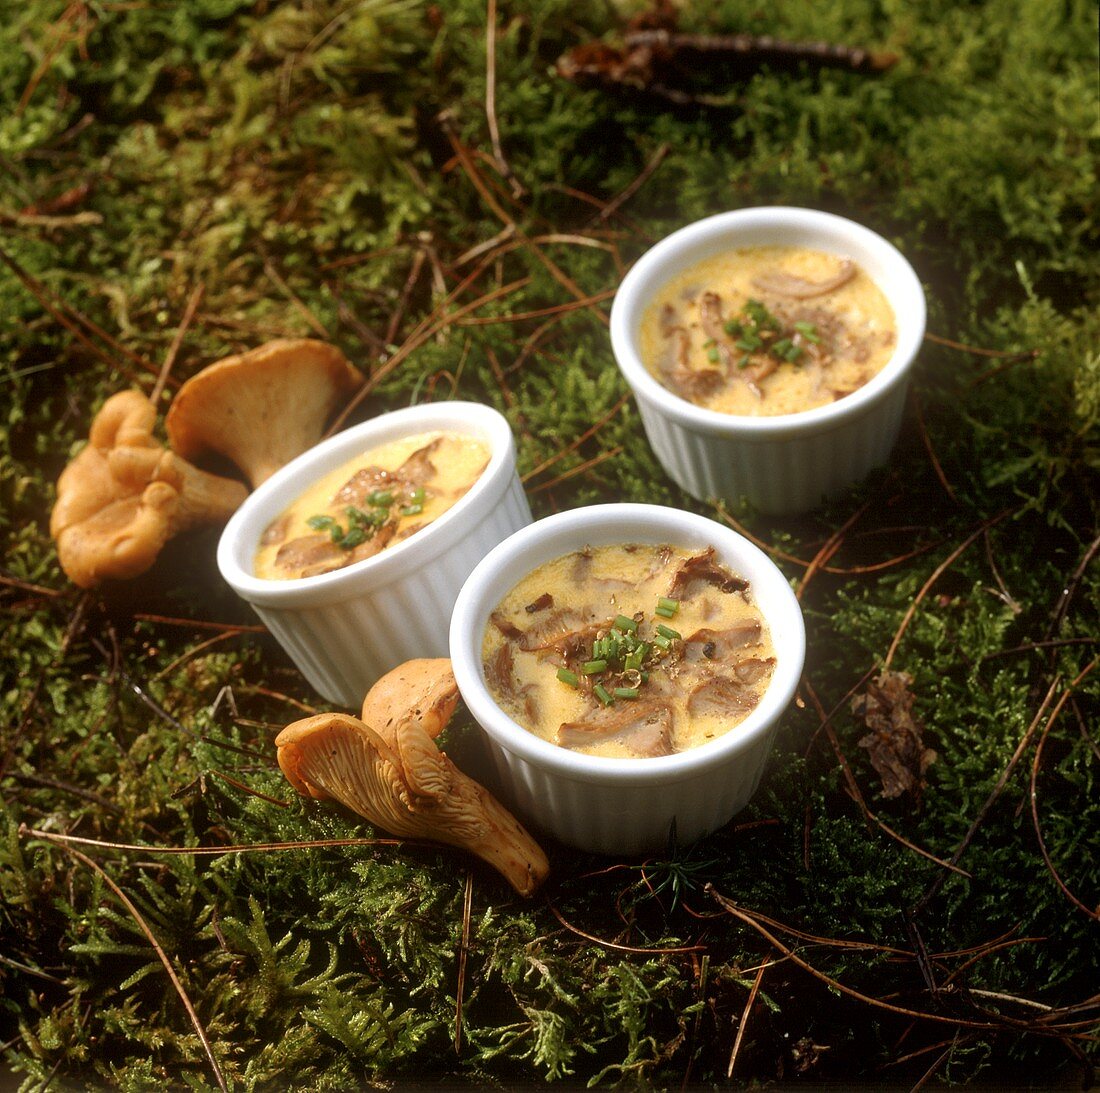 Egg and chanterelle flan in baking dish on grass